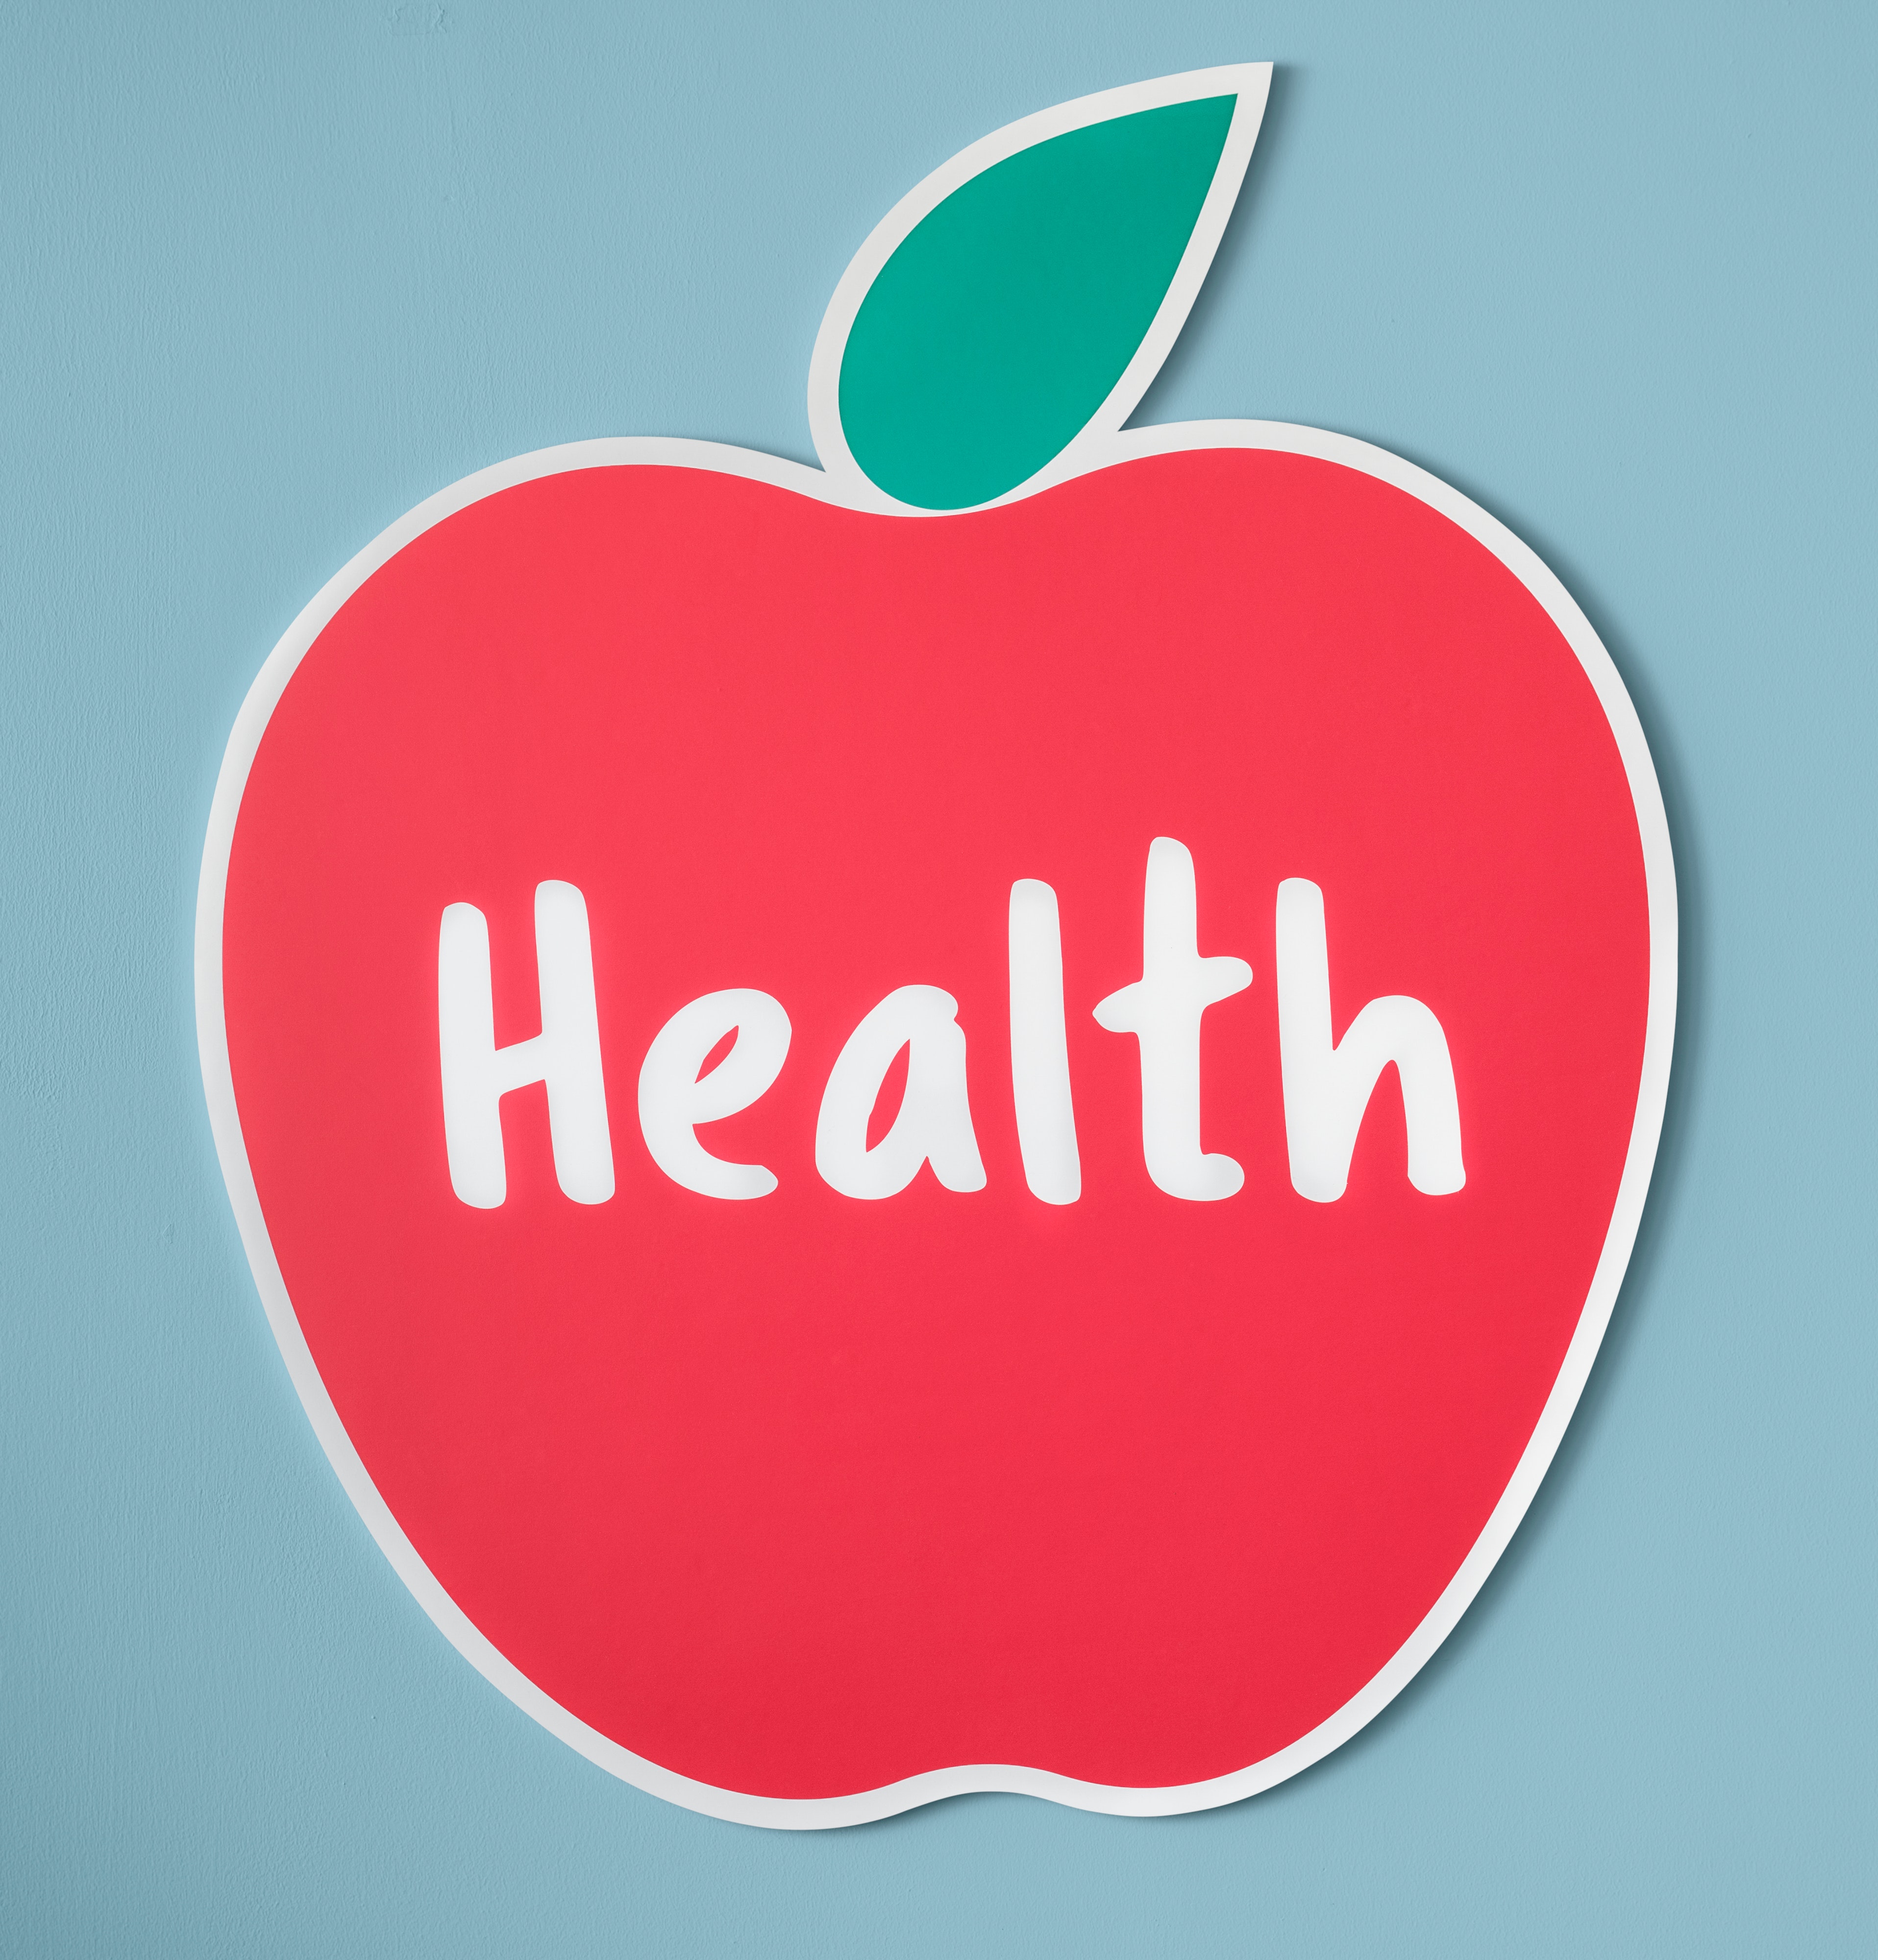 Health coaching is effectiveShould you try it? - Harvard Health